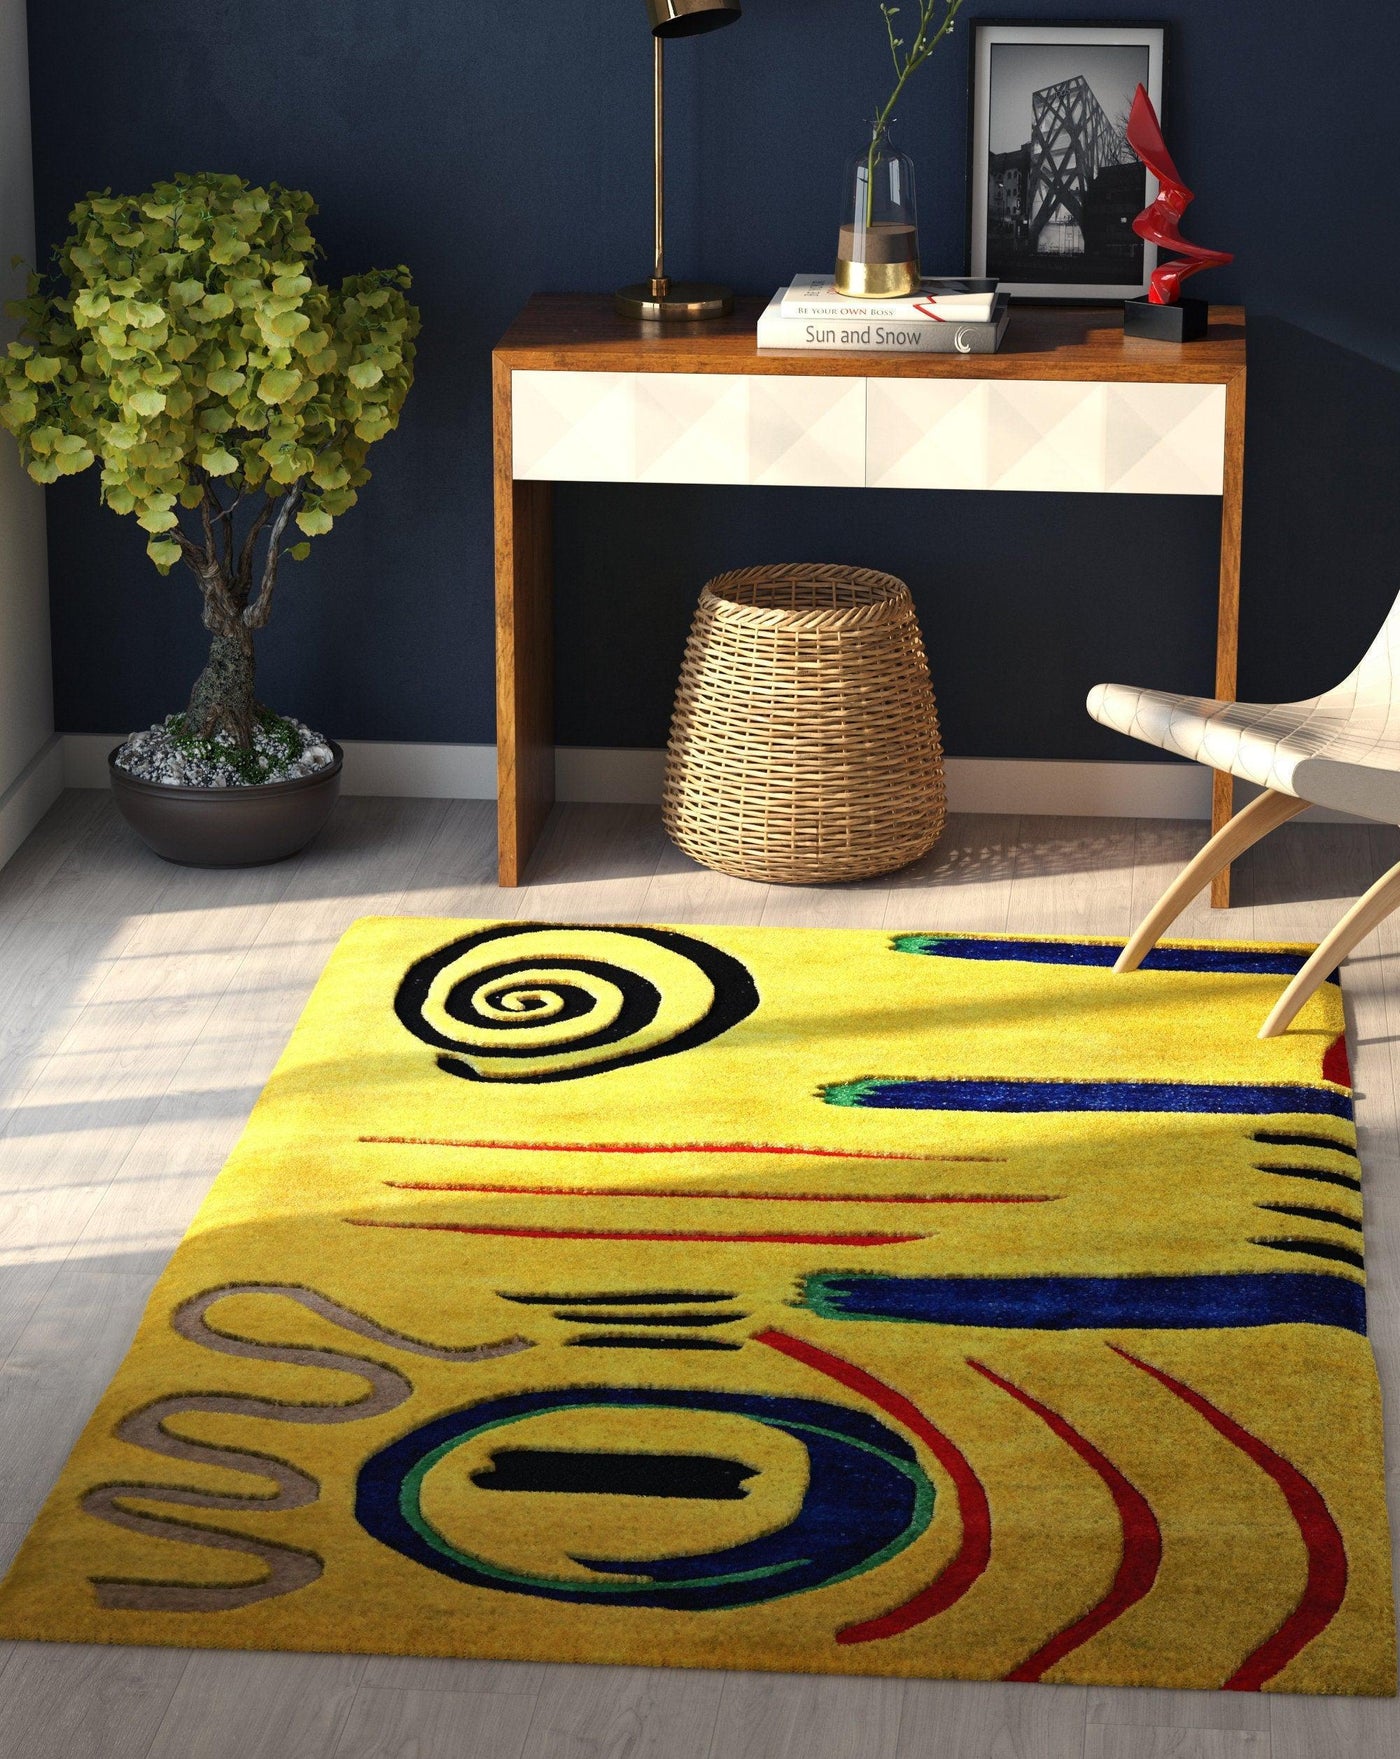 Hand Tufted Rug Hand Made Modern Area Rugs for Room Home Decor Carpet Rugs for Living Room Kids Decor Contemporary Abstract Design Yellow